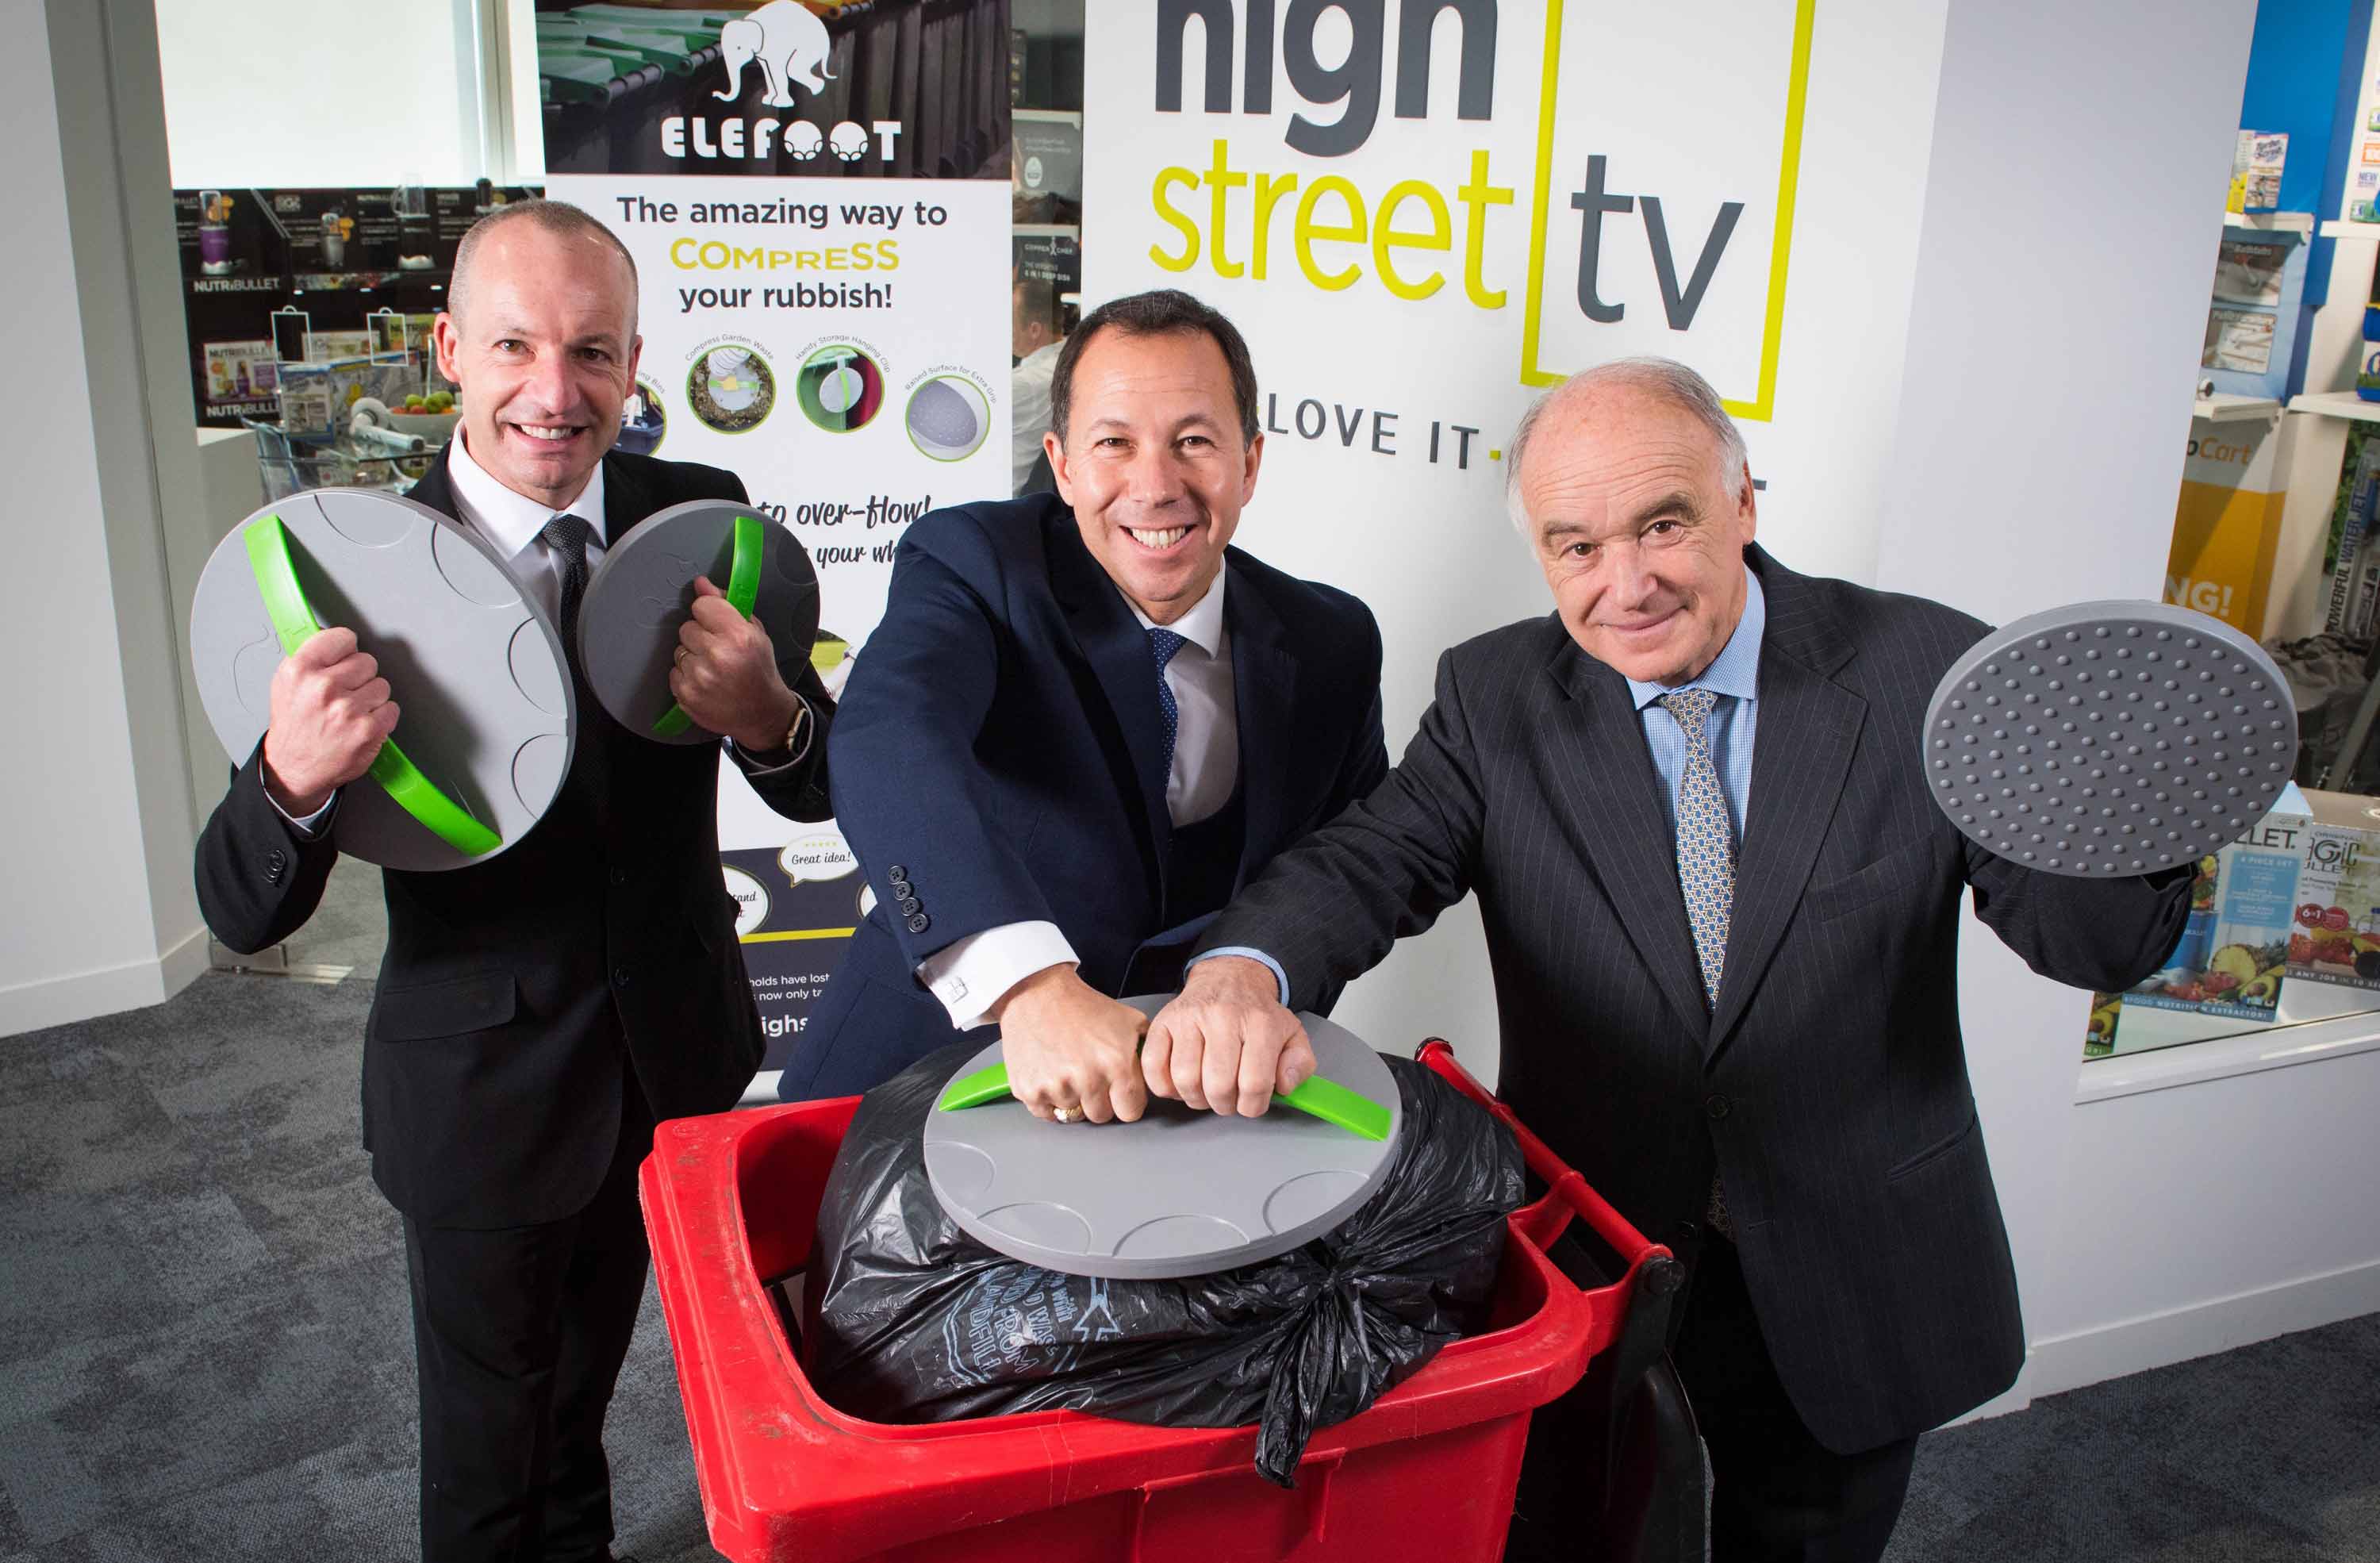 Jim Coleman and Andrew Malcher of High Street TV with Gordon Black and Elefoot